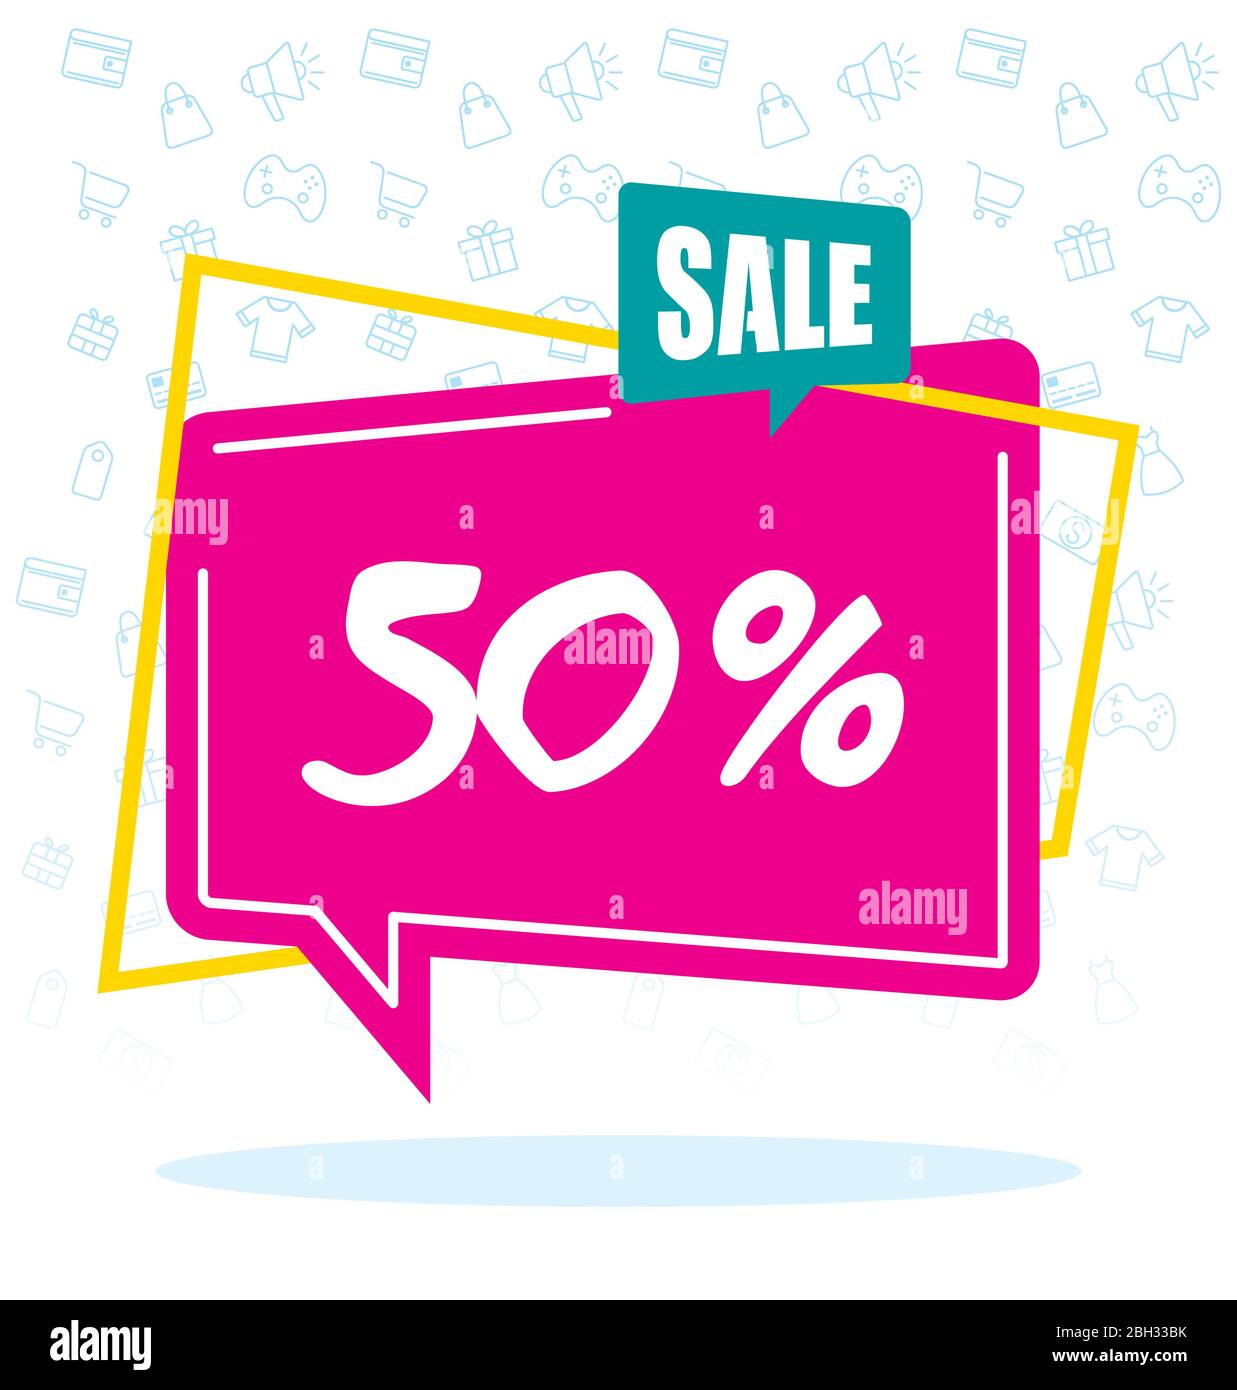 sale half price commercial banner poster Stock Vector